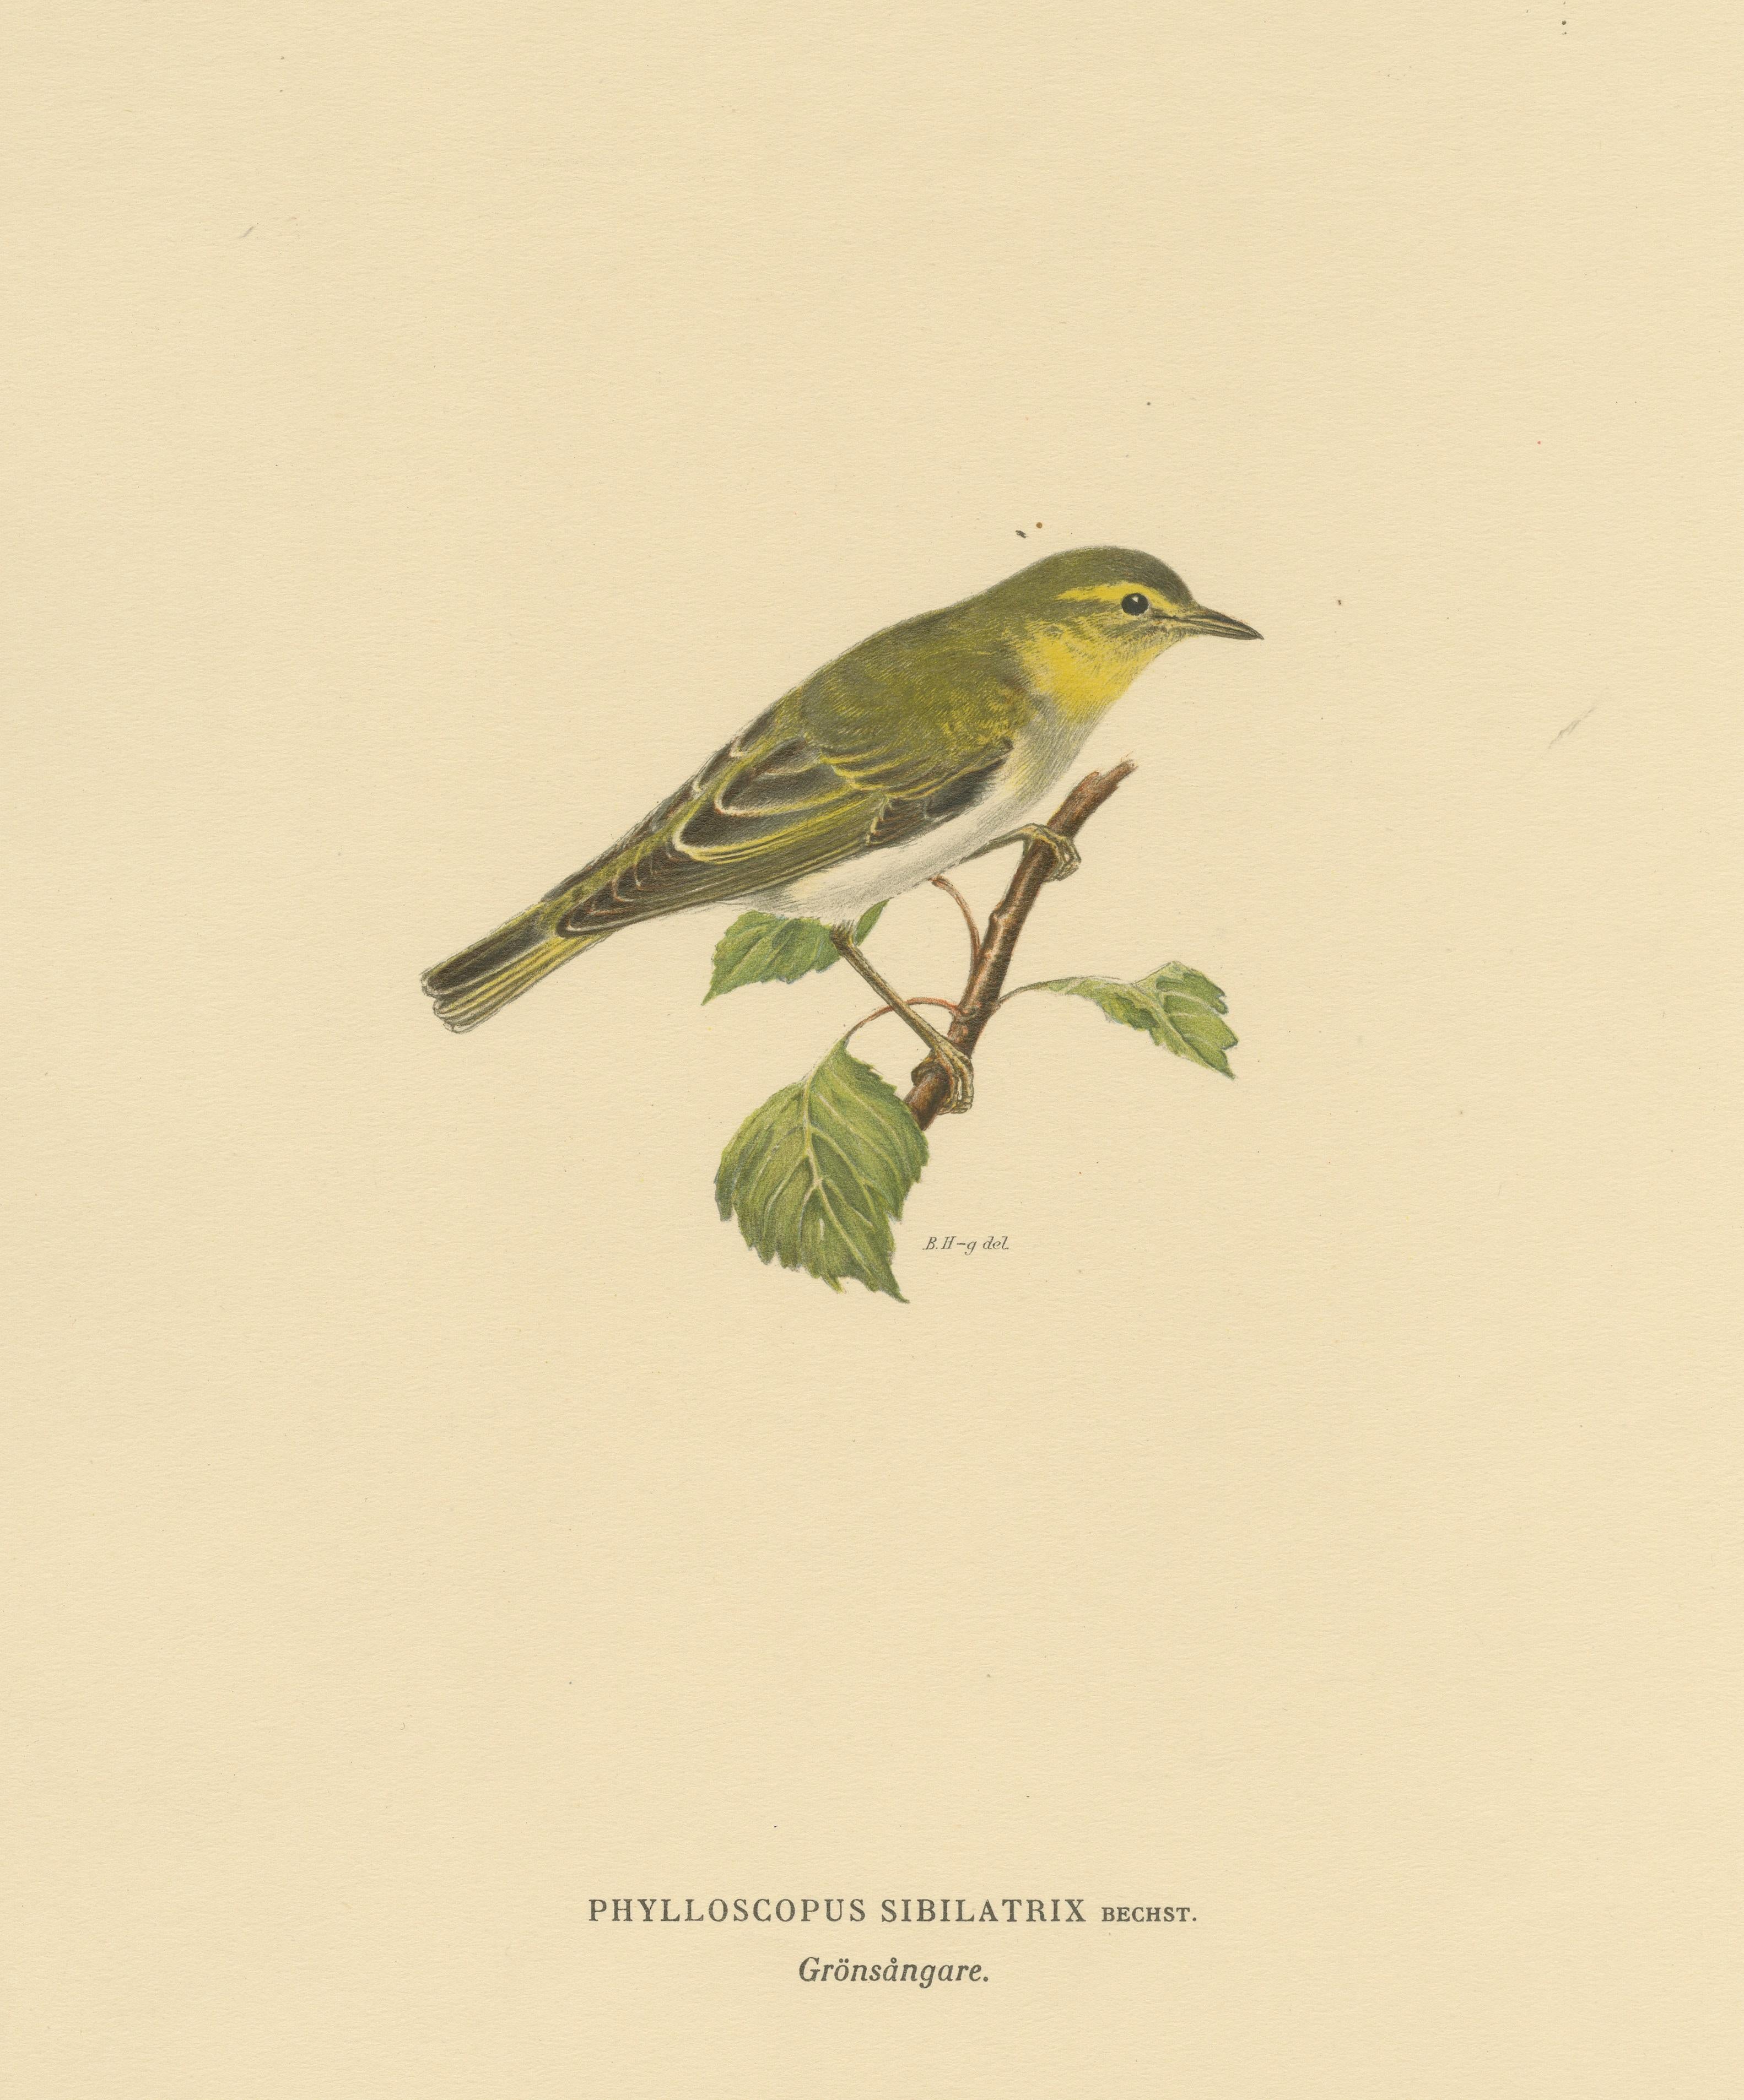 Paper Melody in Green: Vintage Bird Print of The Wood Warbler by M. von Wright, 1927 For Sale